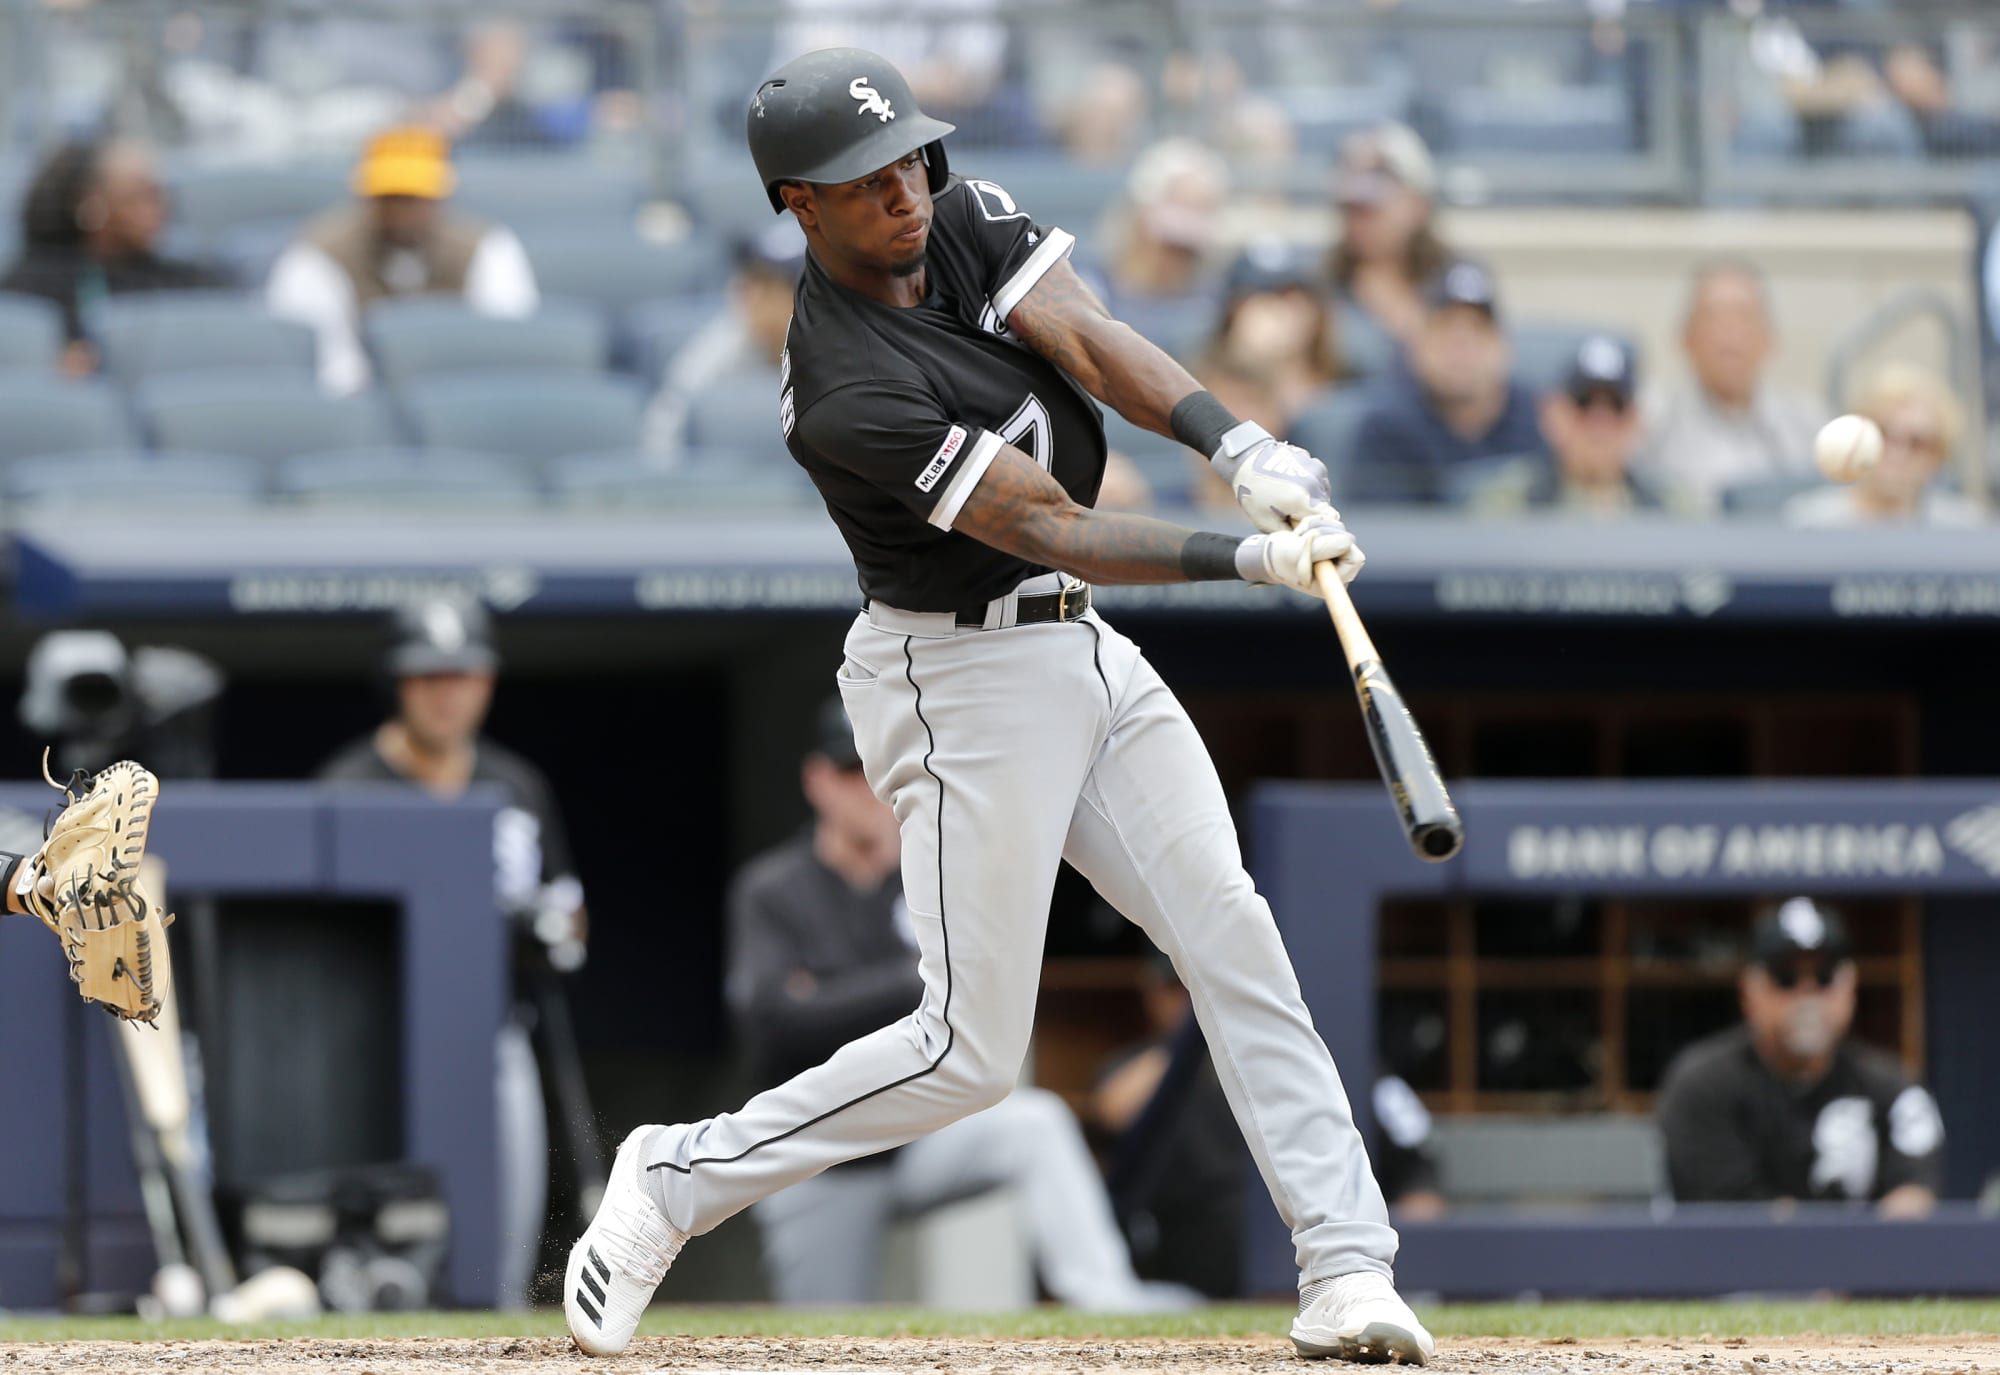 MLB was never going to get a Tim Anderson suspension right